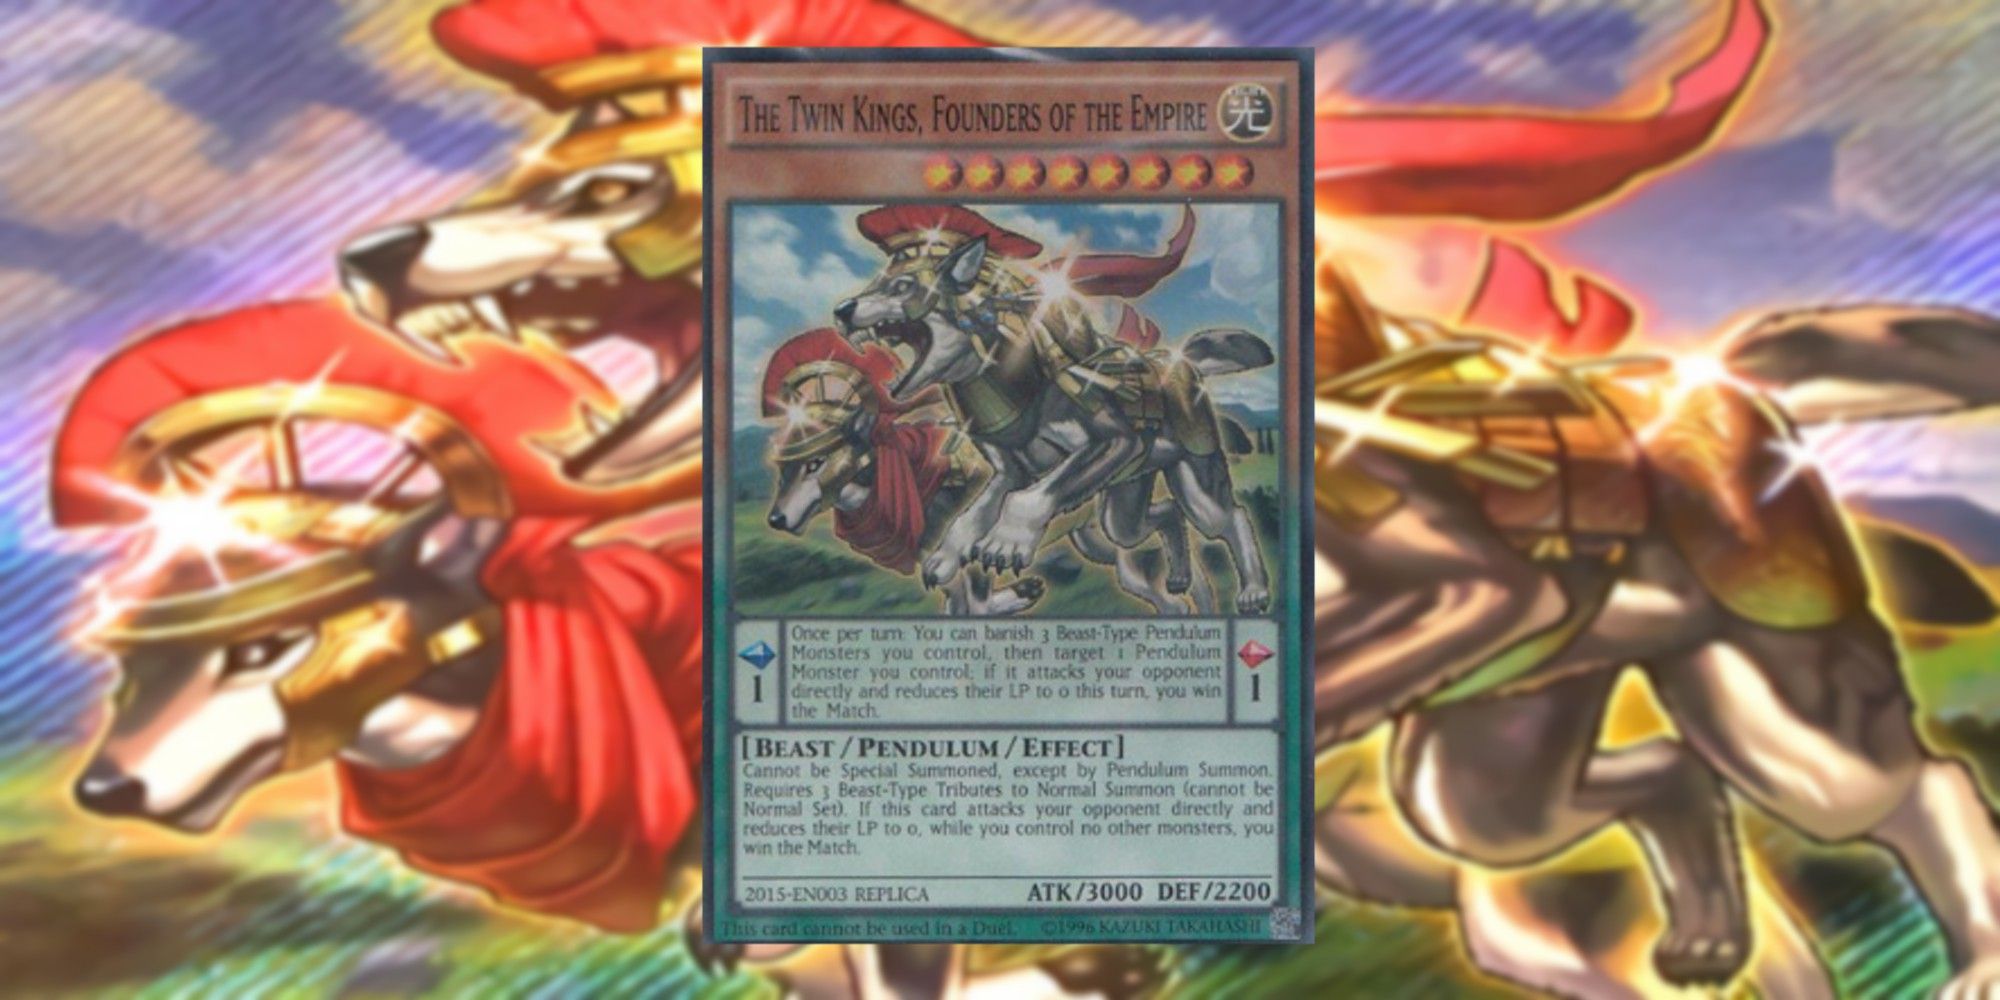 Yugioh The Twin Kings, Founders of the Empire card and art background